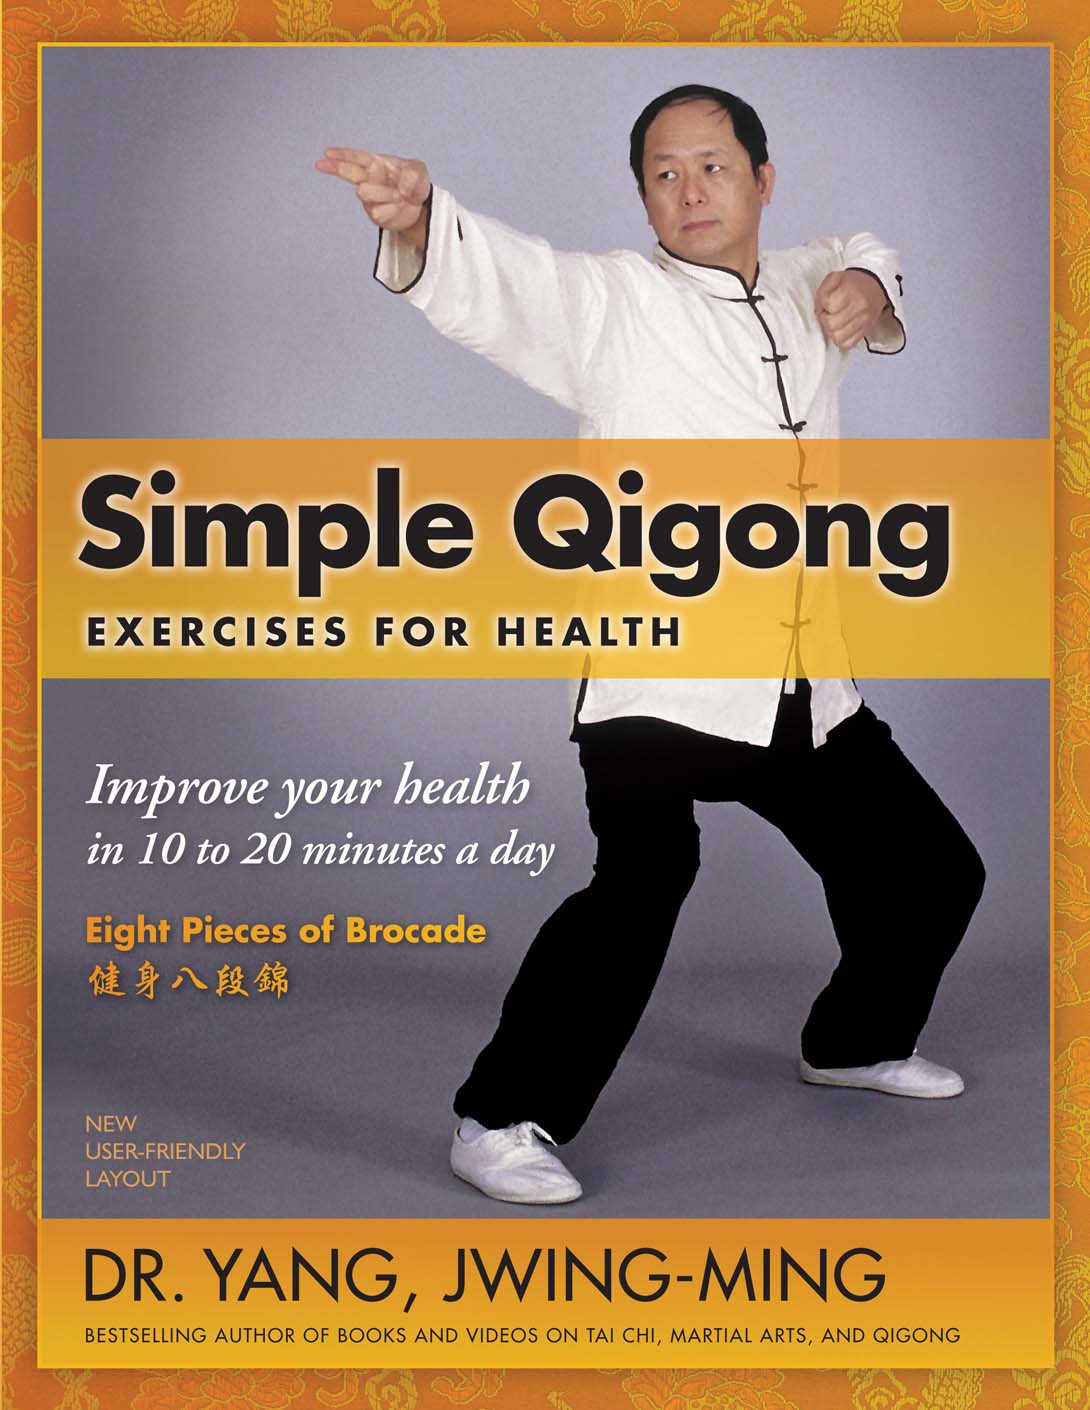 Every Saturday! Ongoing QiGong for Health: Ba Duan Jin Complete Form